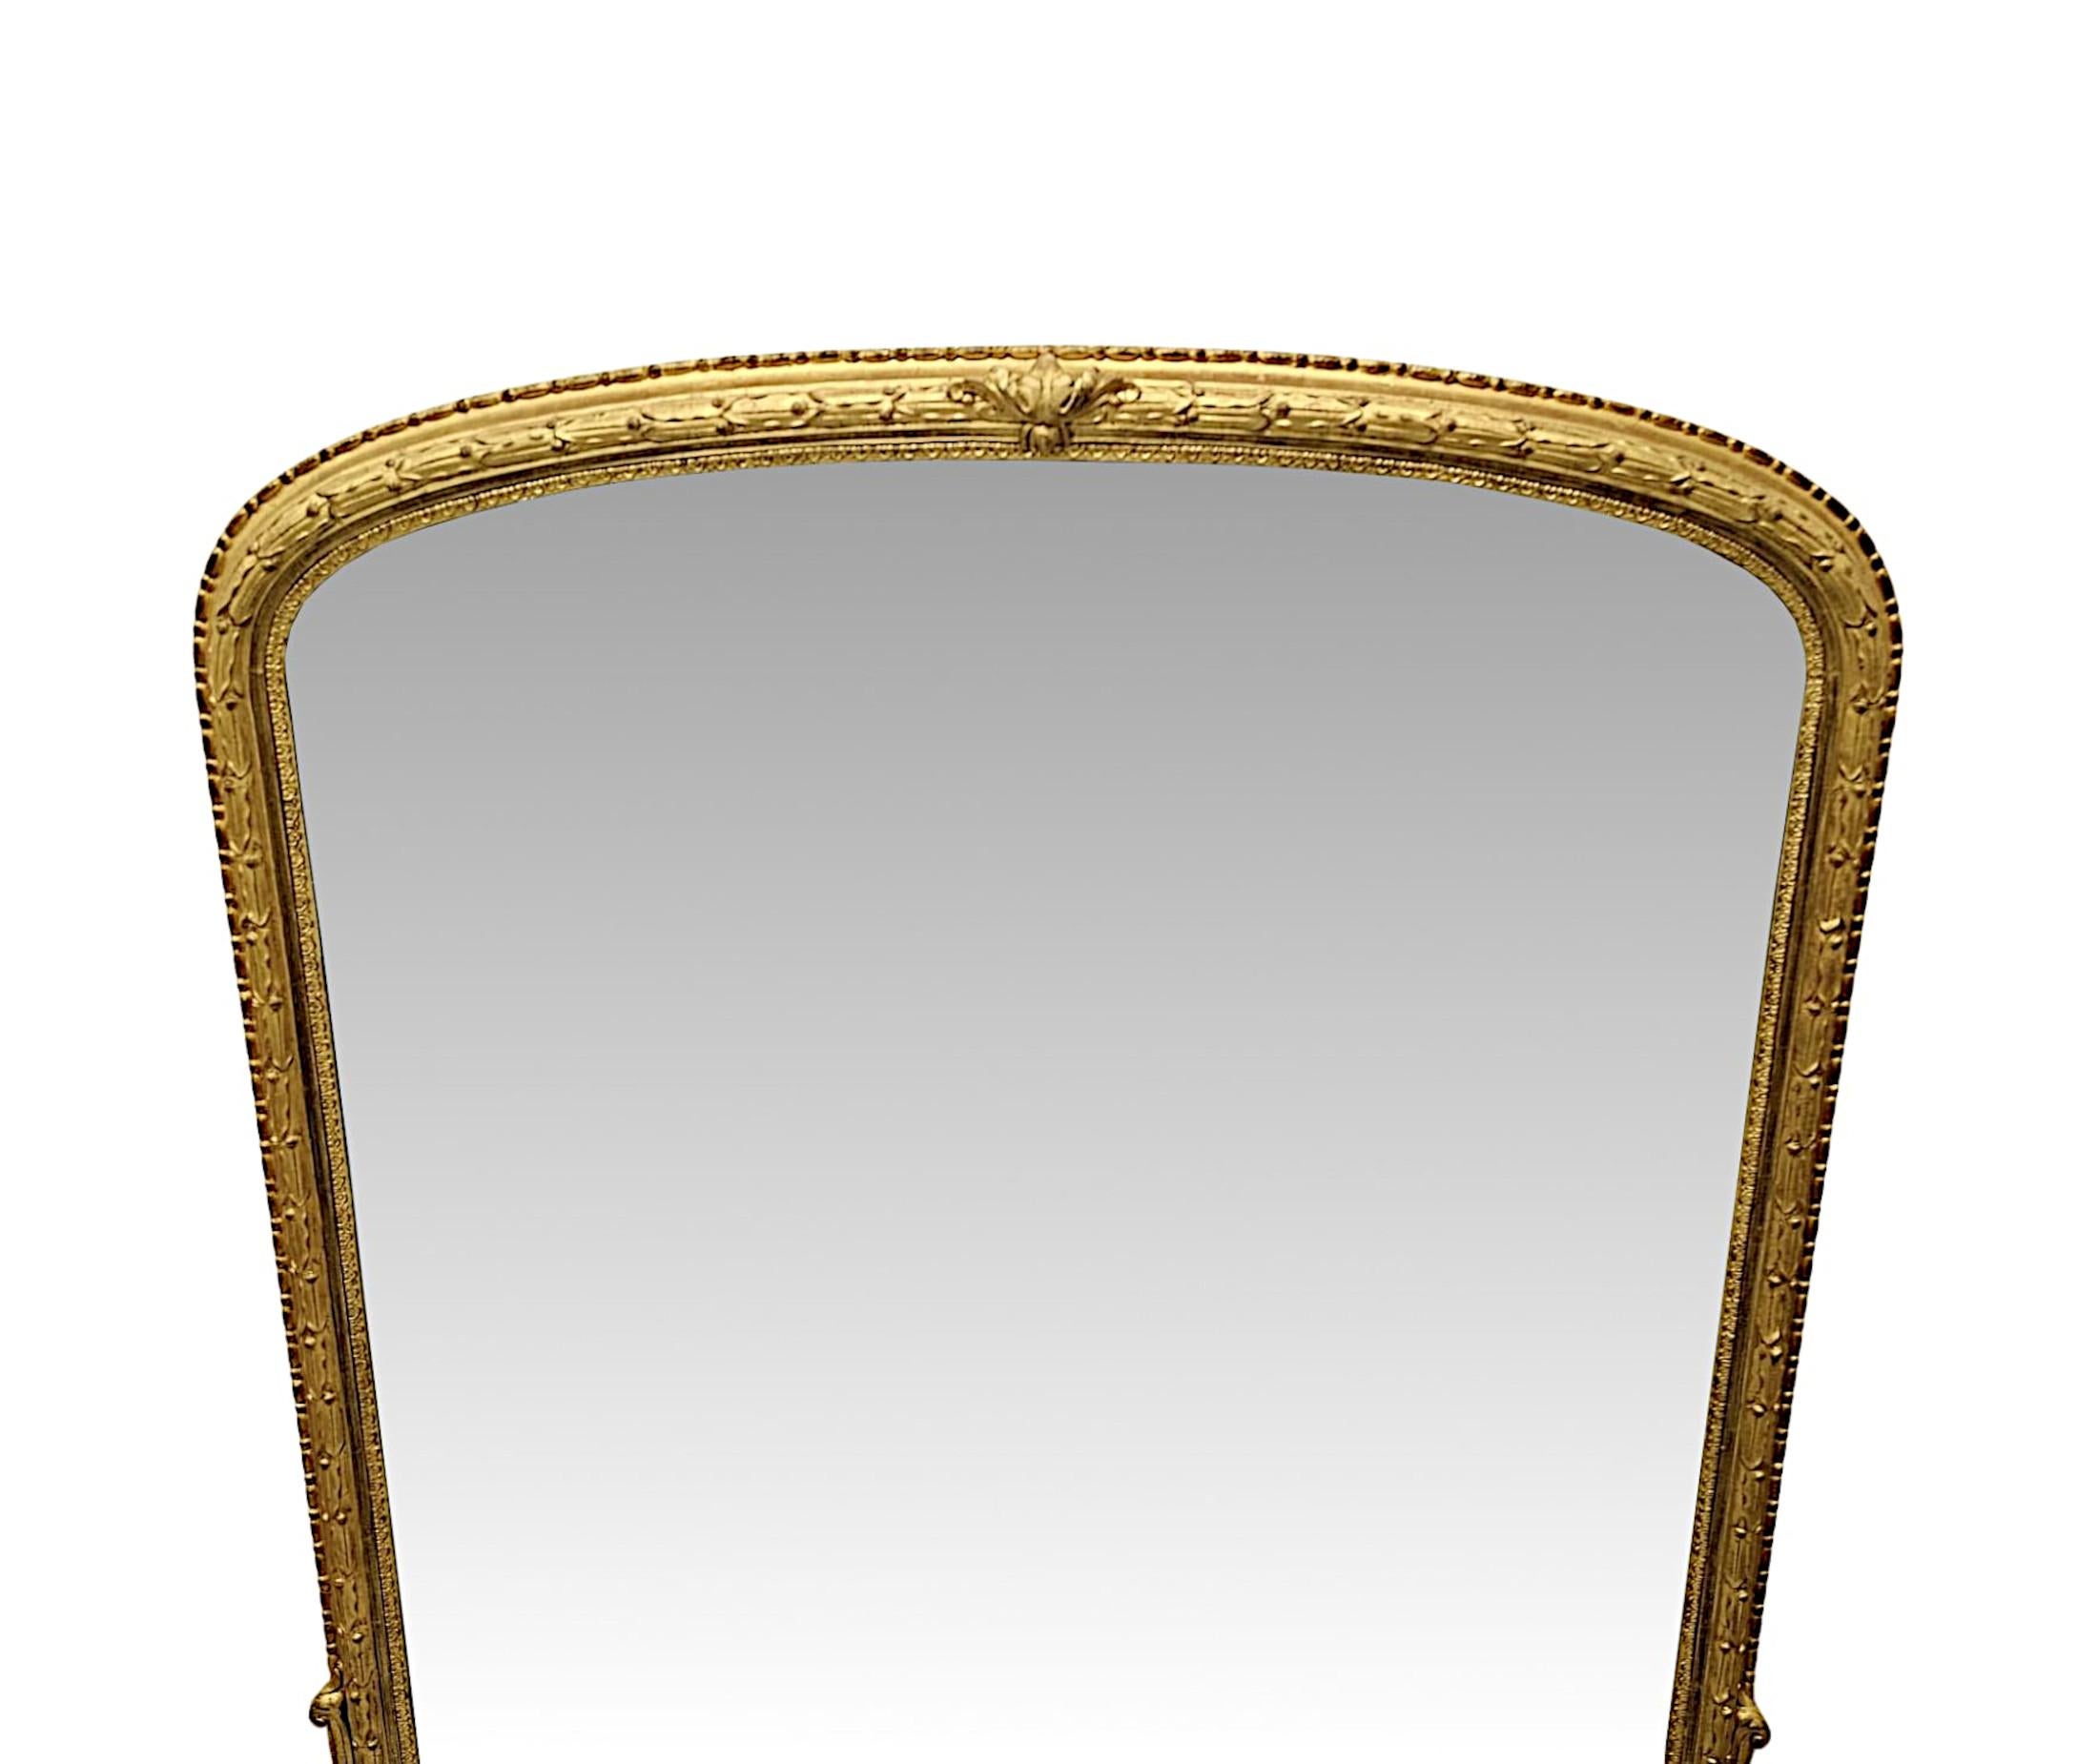 A very fine 19th Century giltwood overmantel mirror of grand proportions and exceptional quality.  The gorgeous sparkly mercury mirror glass plate of archtop form is set within an elegantly simple and finely hand carved moulded and fluted giltwood